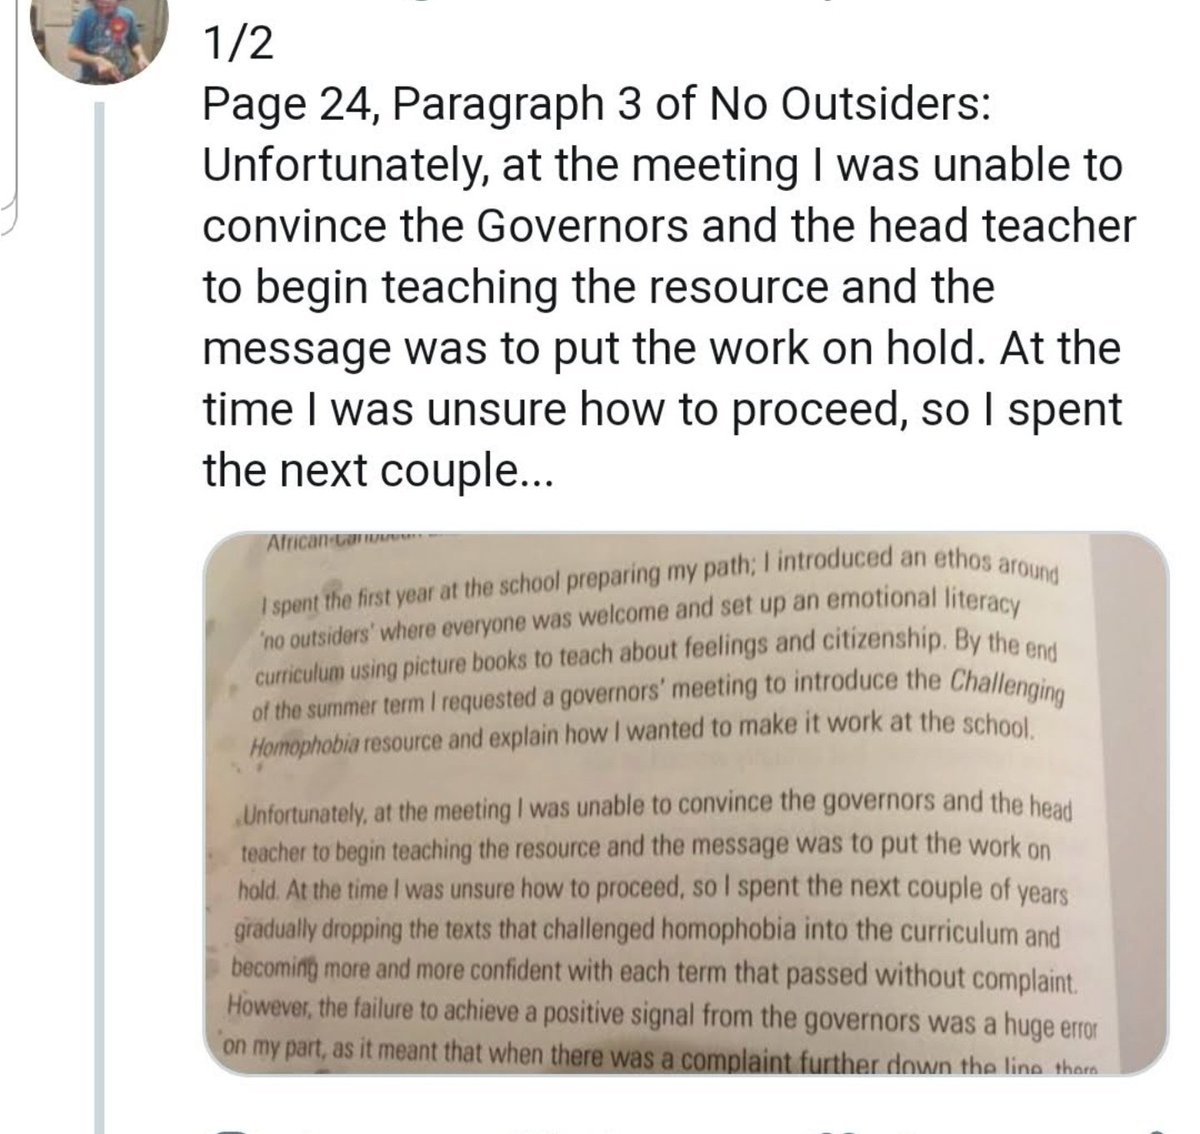 Moffat admits in his No Outsiders book that after governors refused his CHIPS resource ..he spent couple years dropping the text from CHIPS into the curriculum